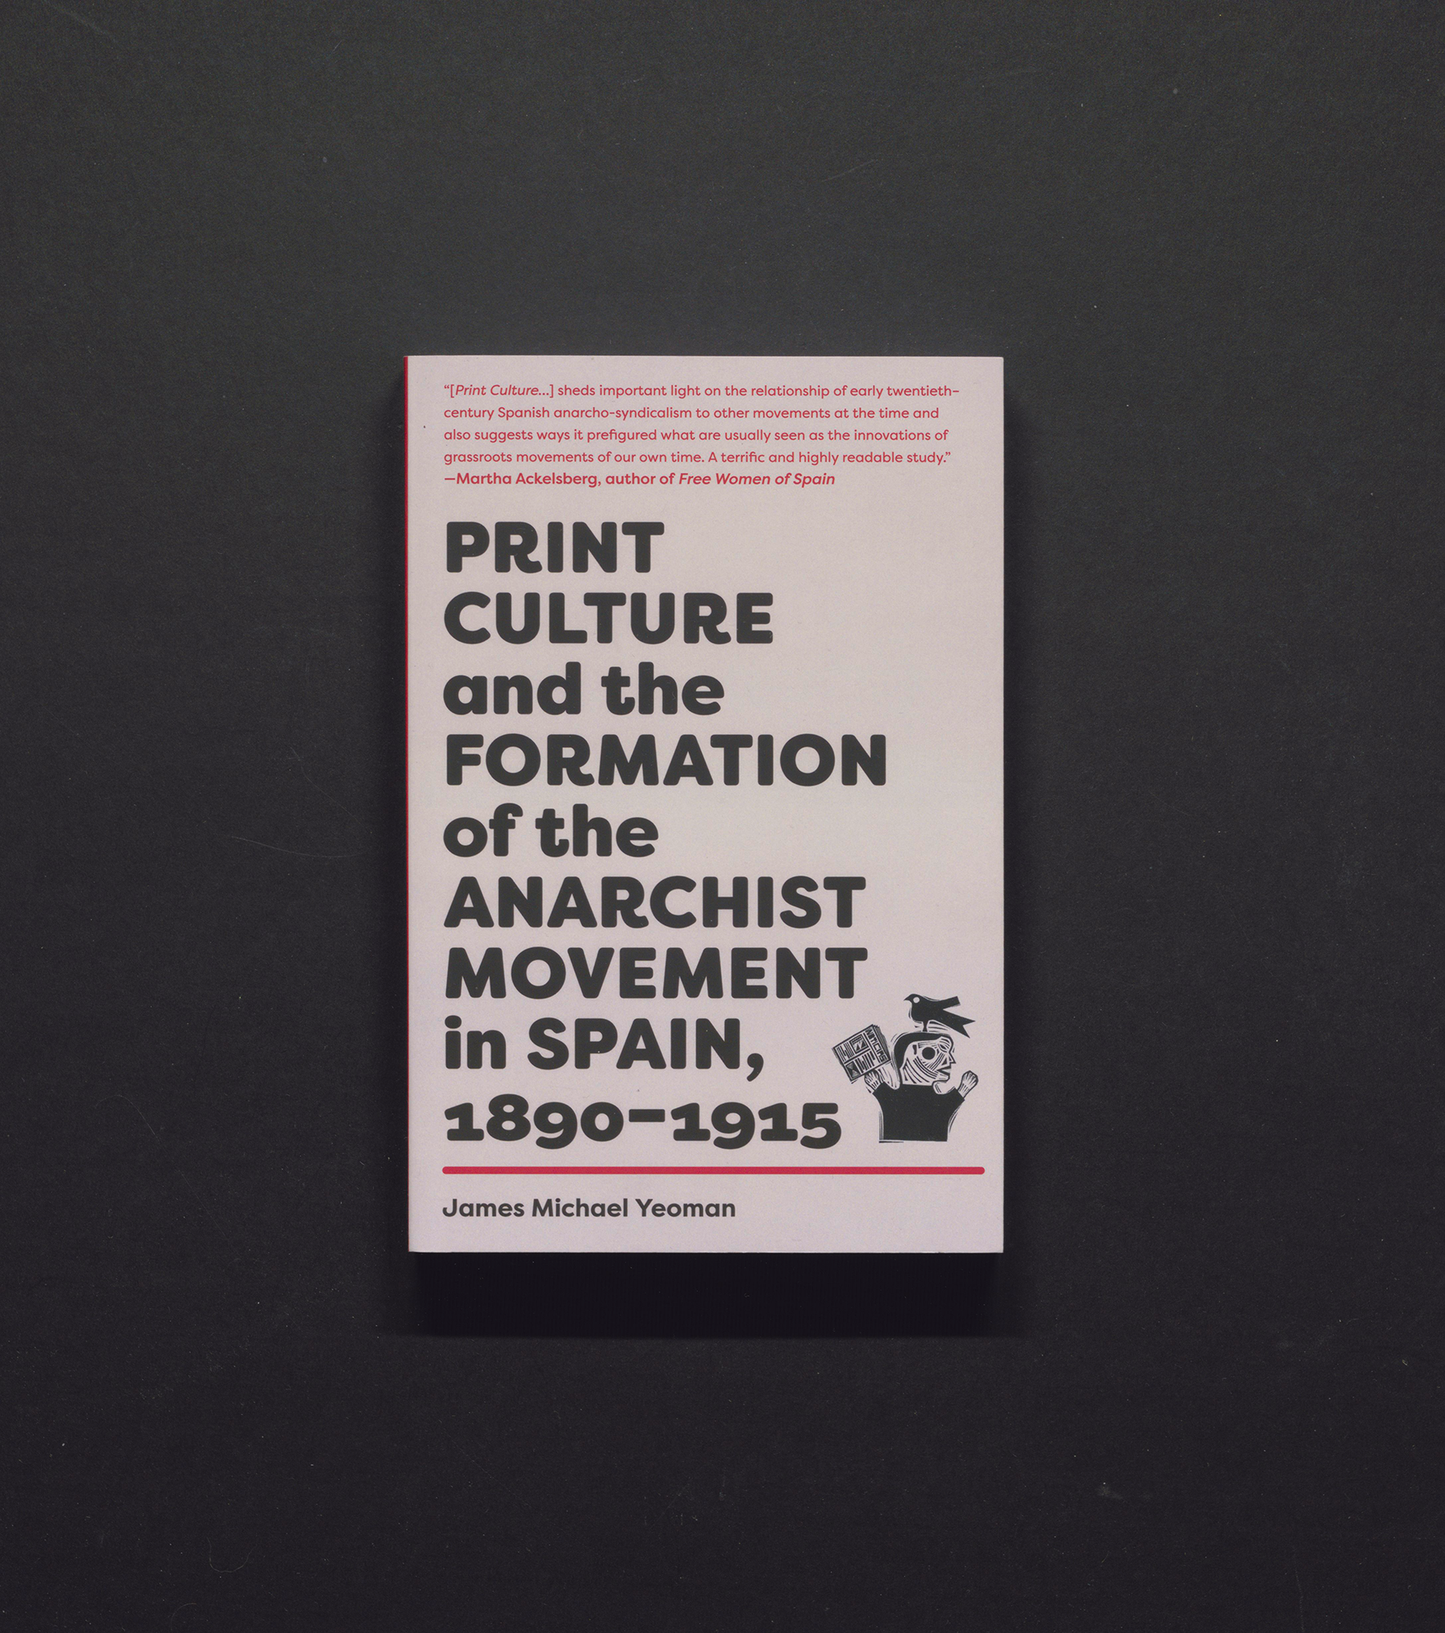 Print Culture and the Formation of the Anarchist Movement in Spain, 1890 - 1915